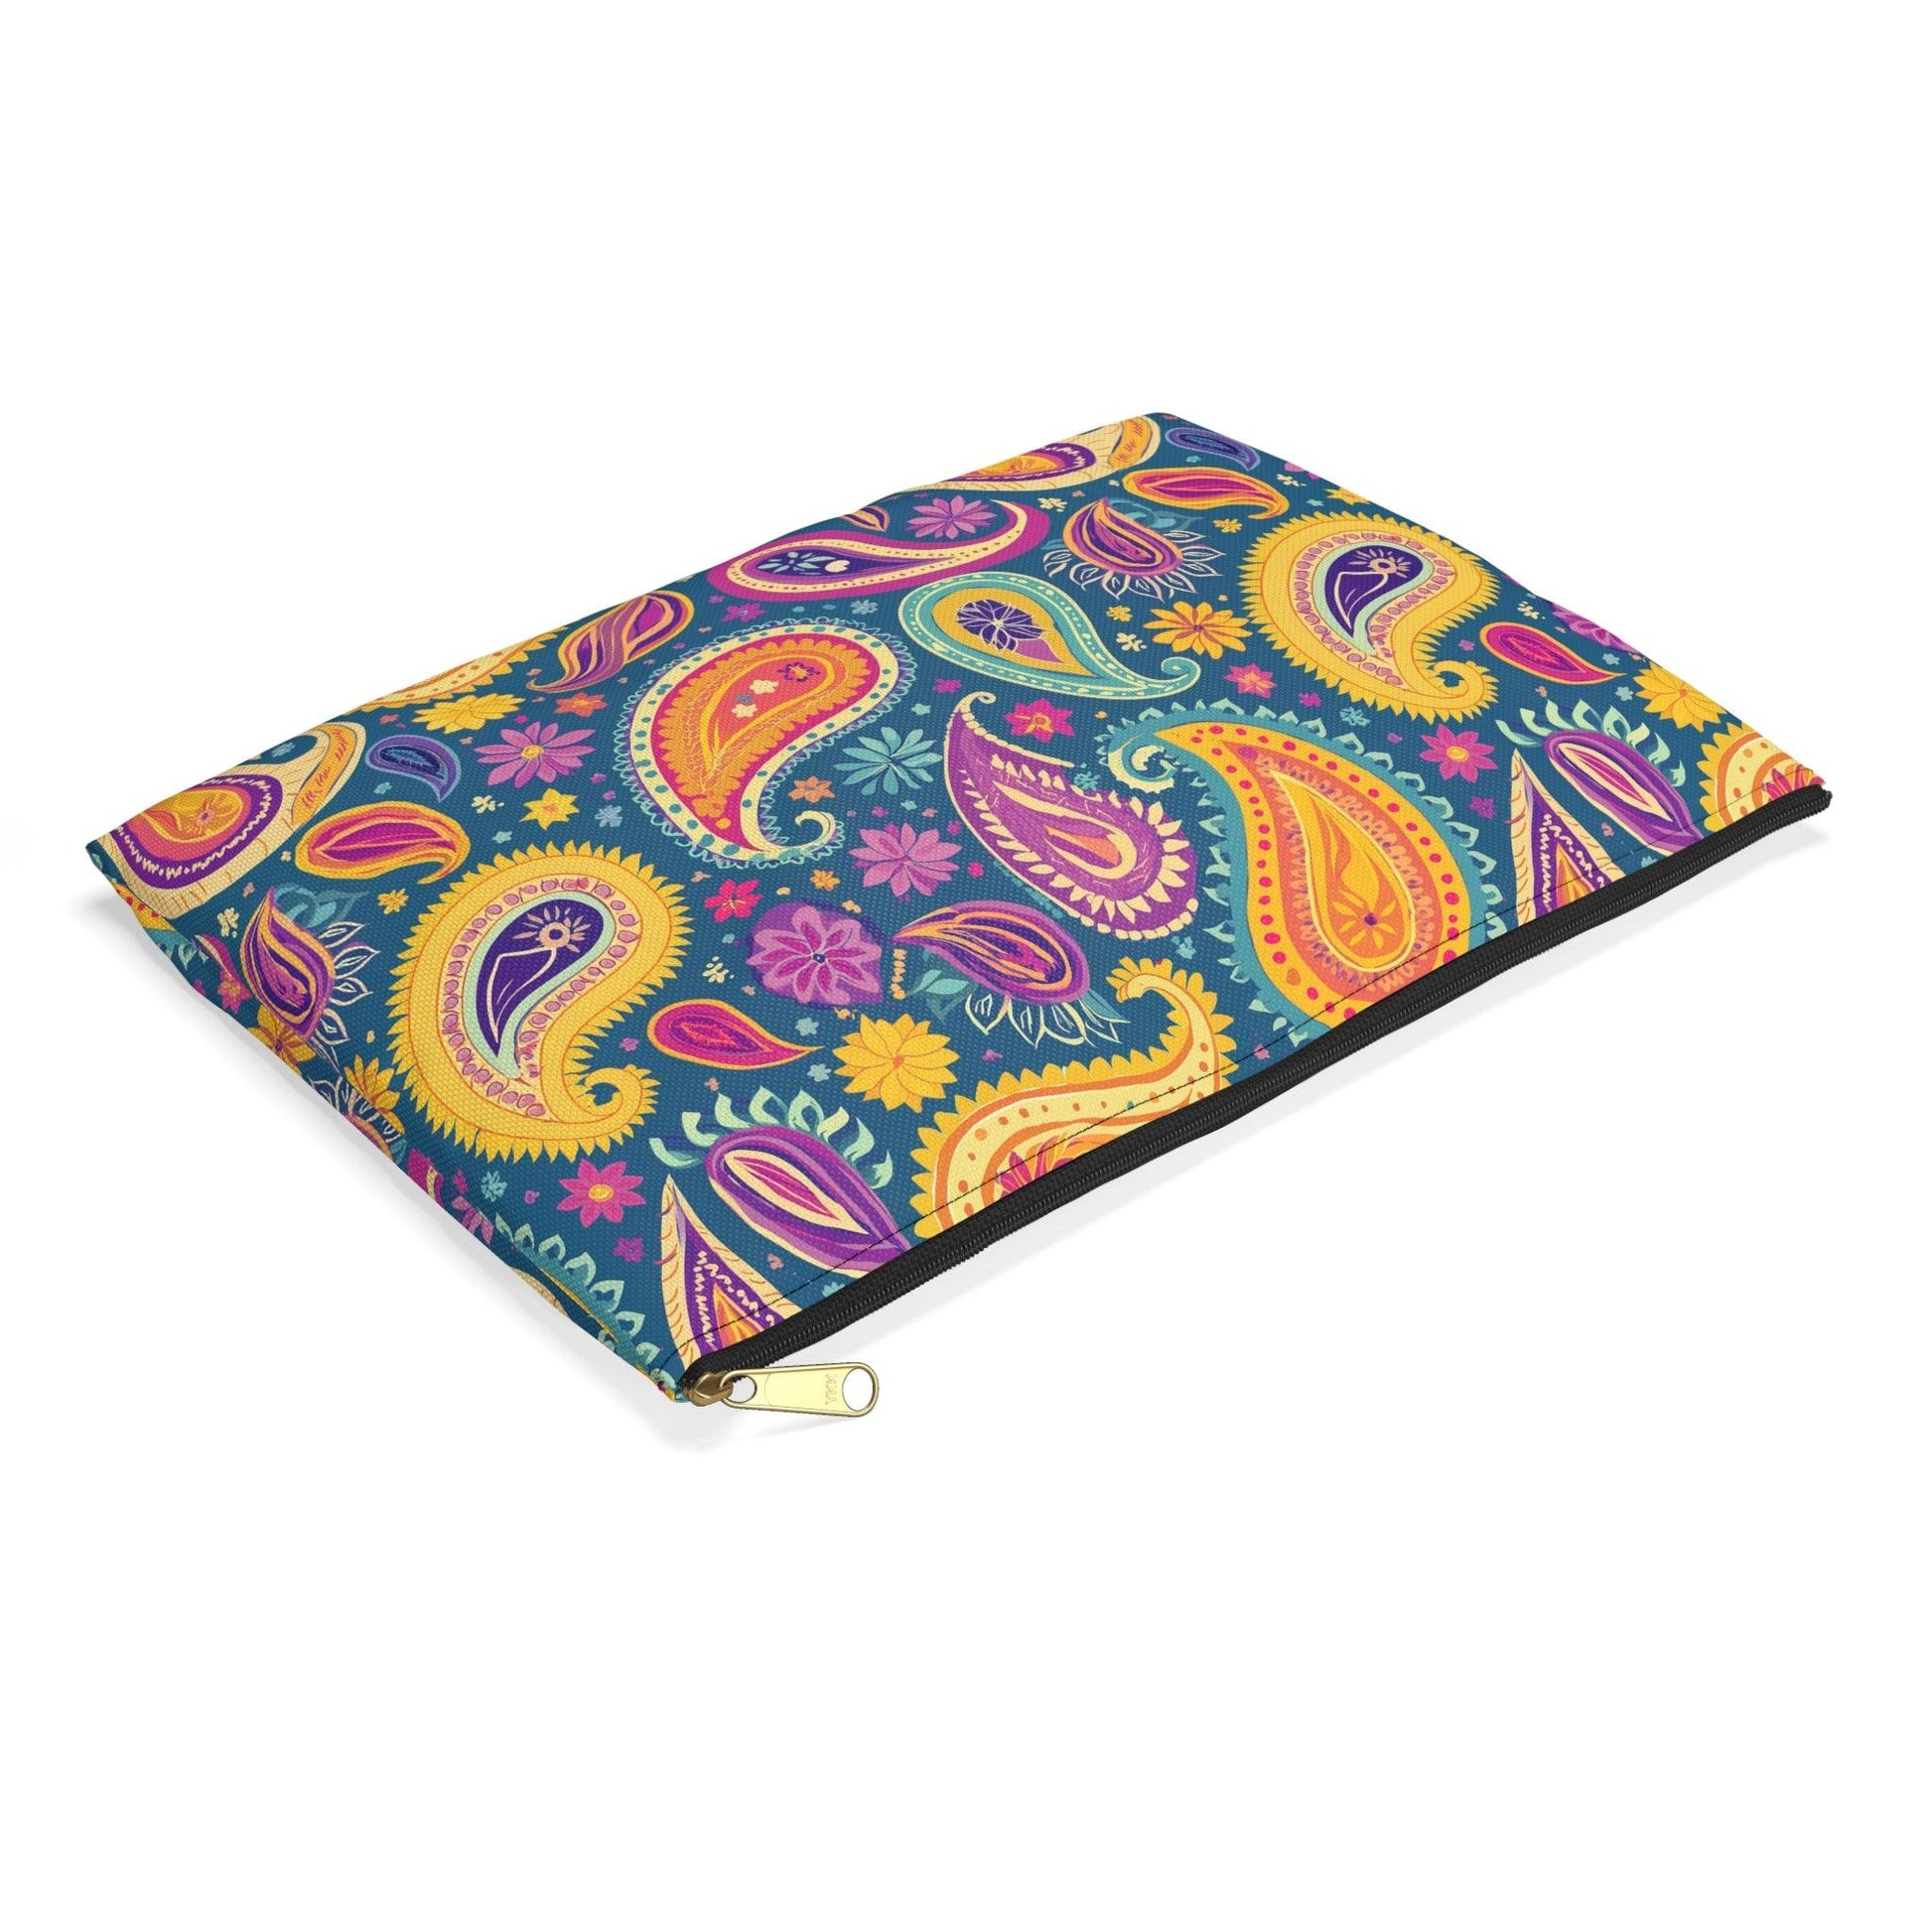 Indian Whimsical Paisley Pouch - The Global Wanderer